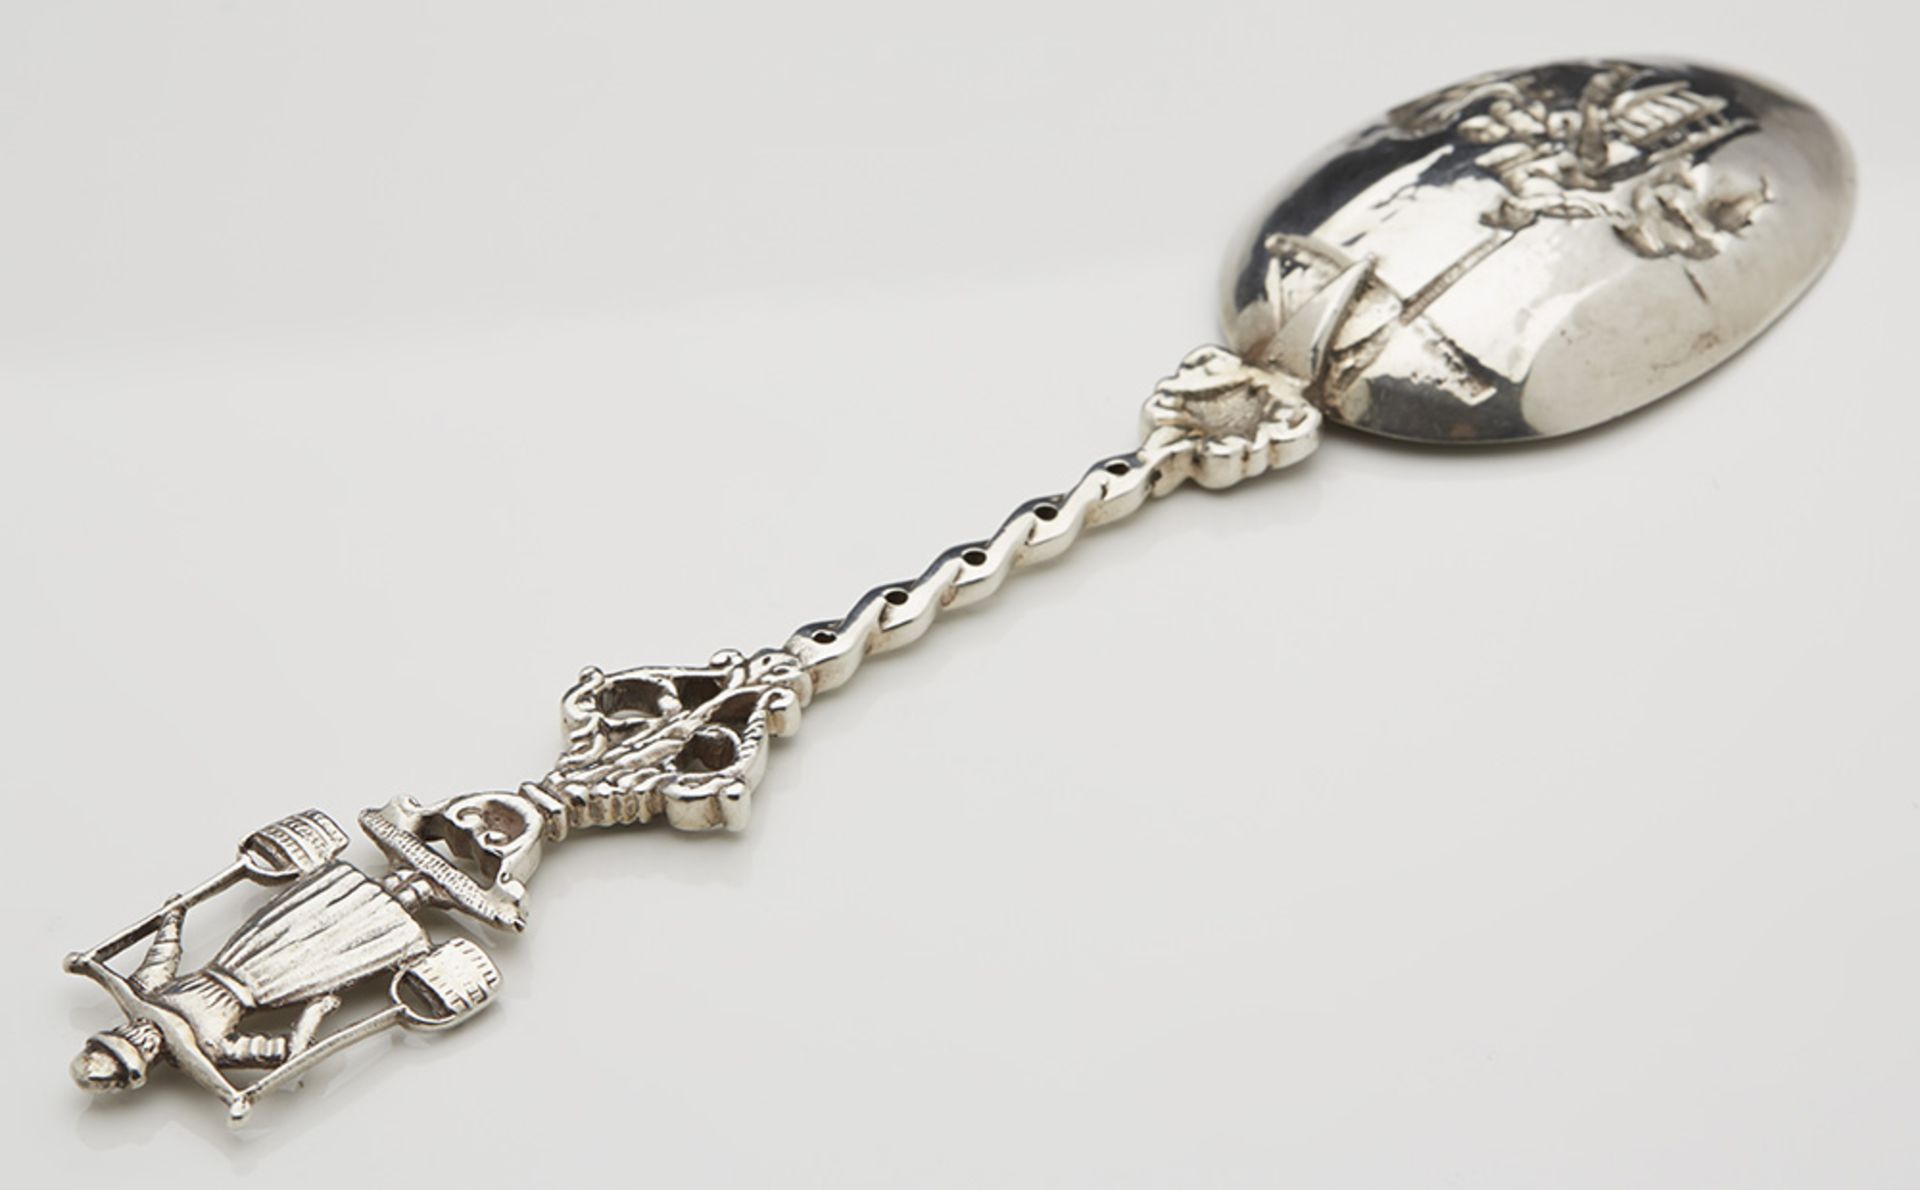 Fine Antique Dutch Silver Happy Farmers Presentation Spoon With Figural Bowl 19Th C. - Image 7 of 7